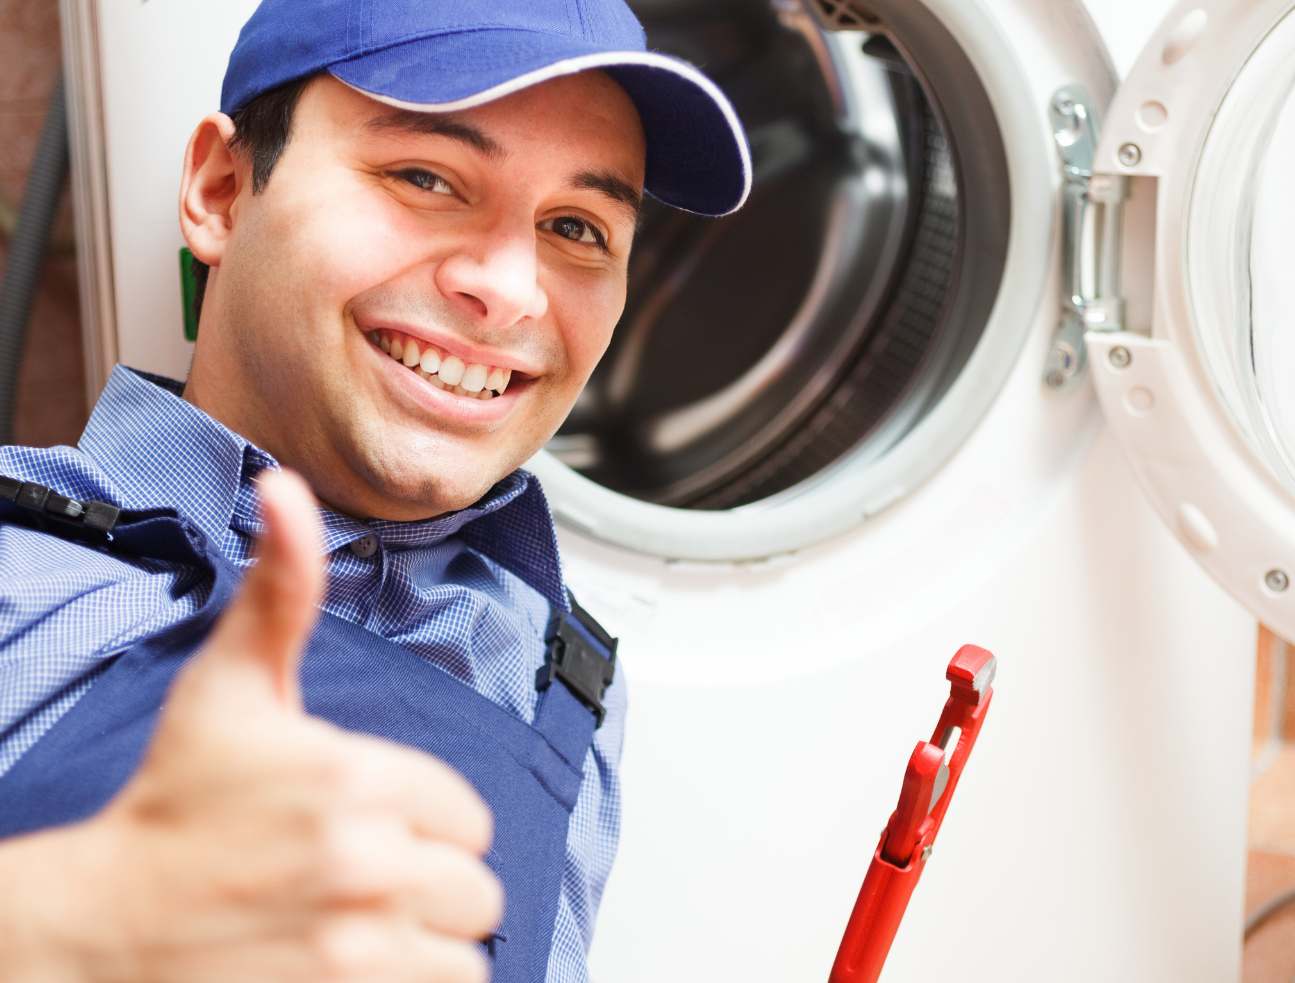 A professional cleaner/repair man fixing up a dryer